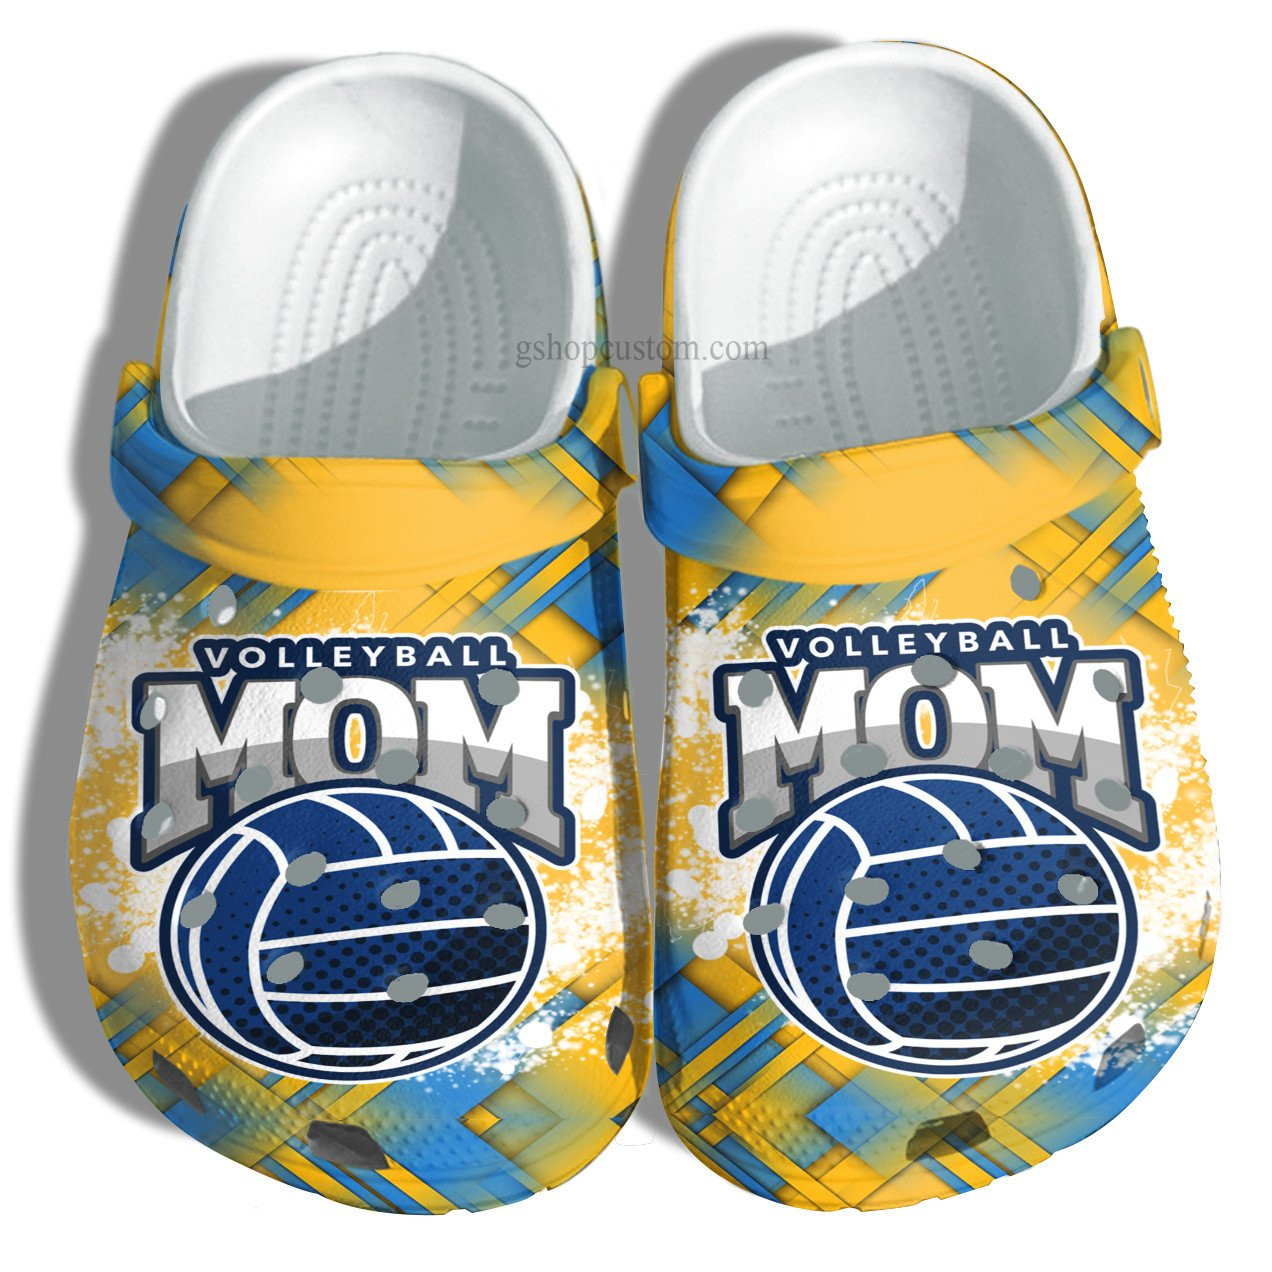 Volleyball Mom Croc Shoes Gift Grandma - Volleyball Cheer Up Daughter Player Mom Crocs Shoes Gift Mommy Birthday